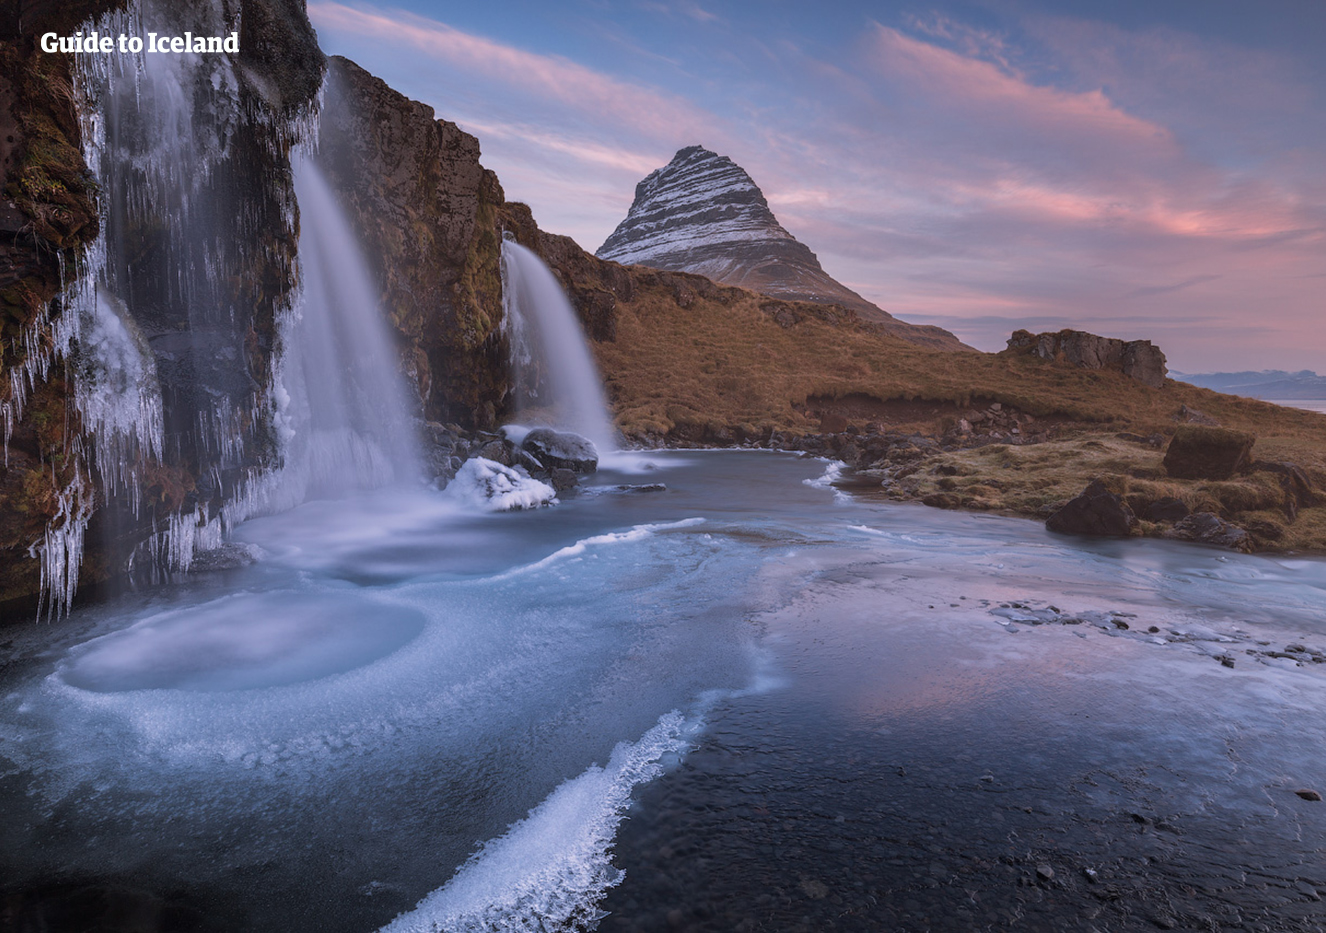 Kirkjufellsfoss is a stunning falls, even if on the small side, that sits before the pyramid-peak Kirkjufell, in west Iceland.